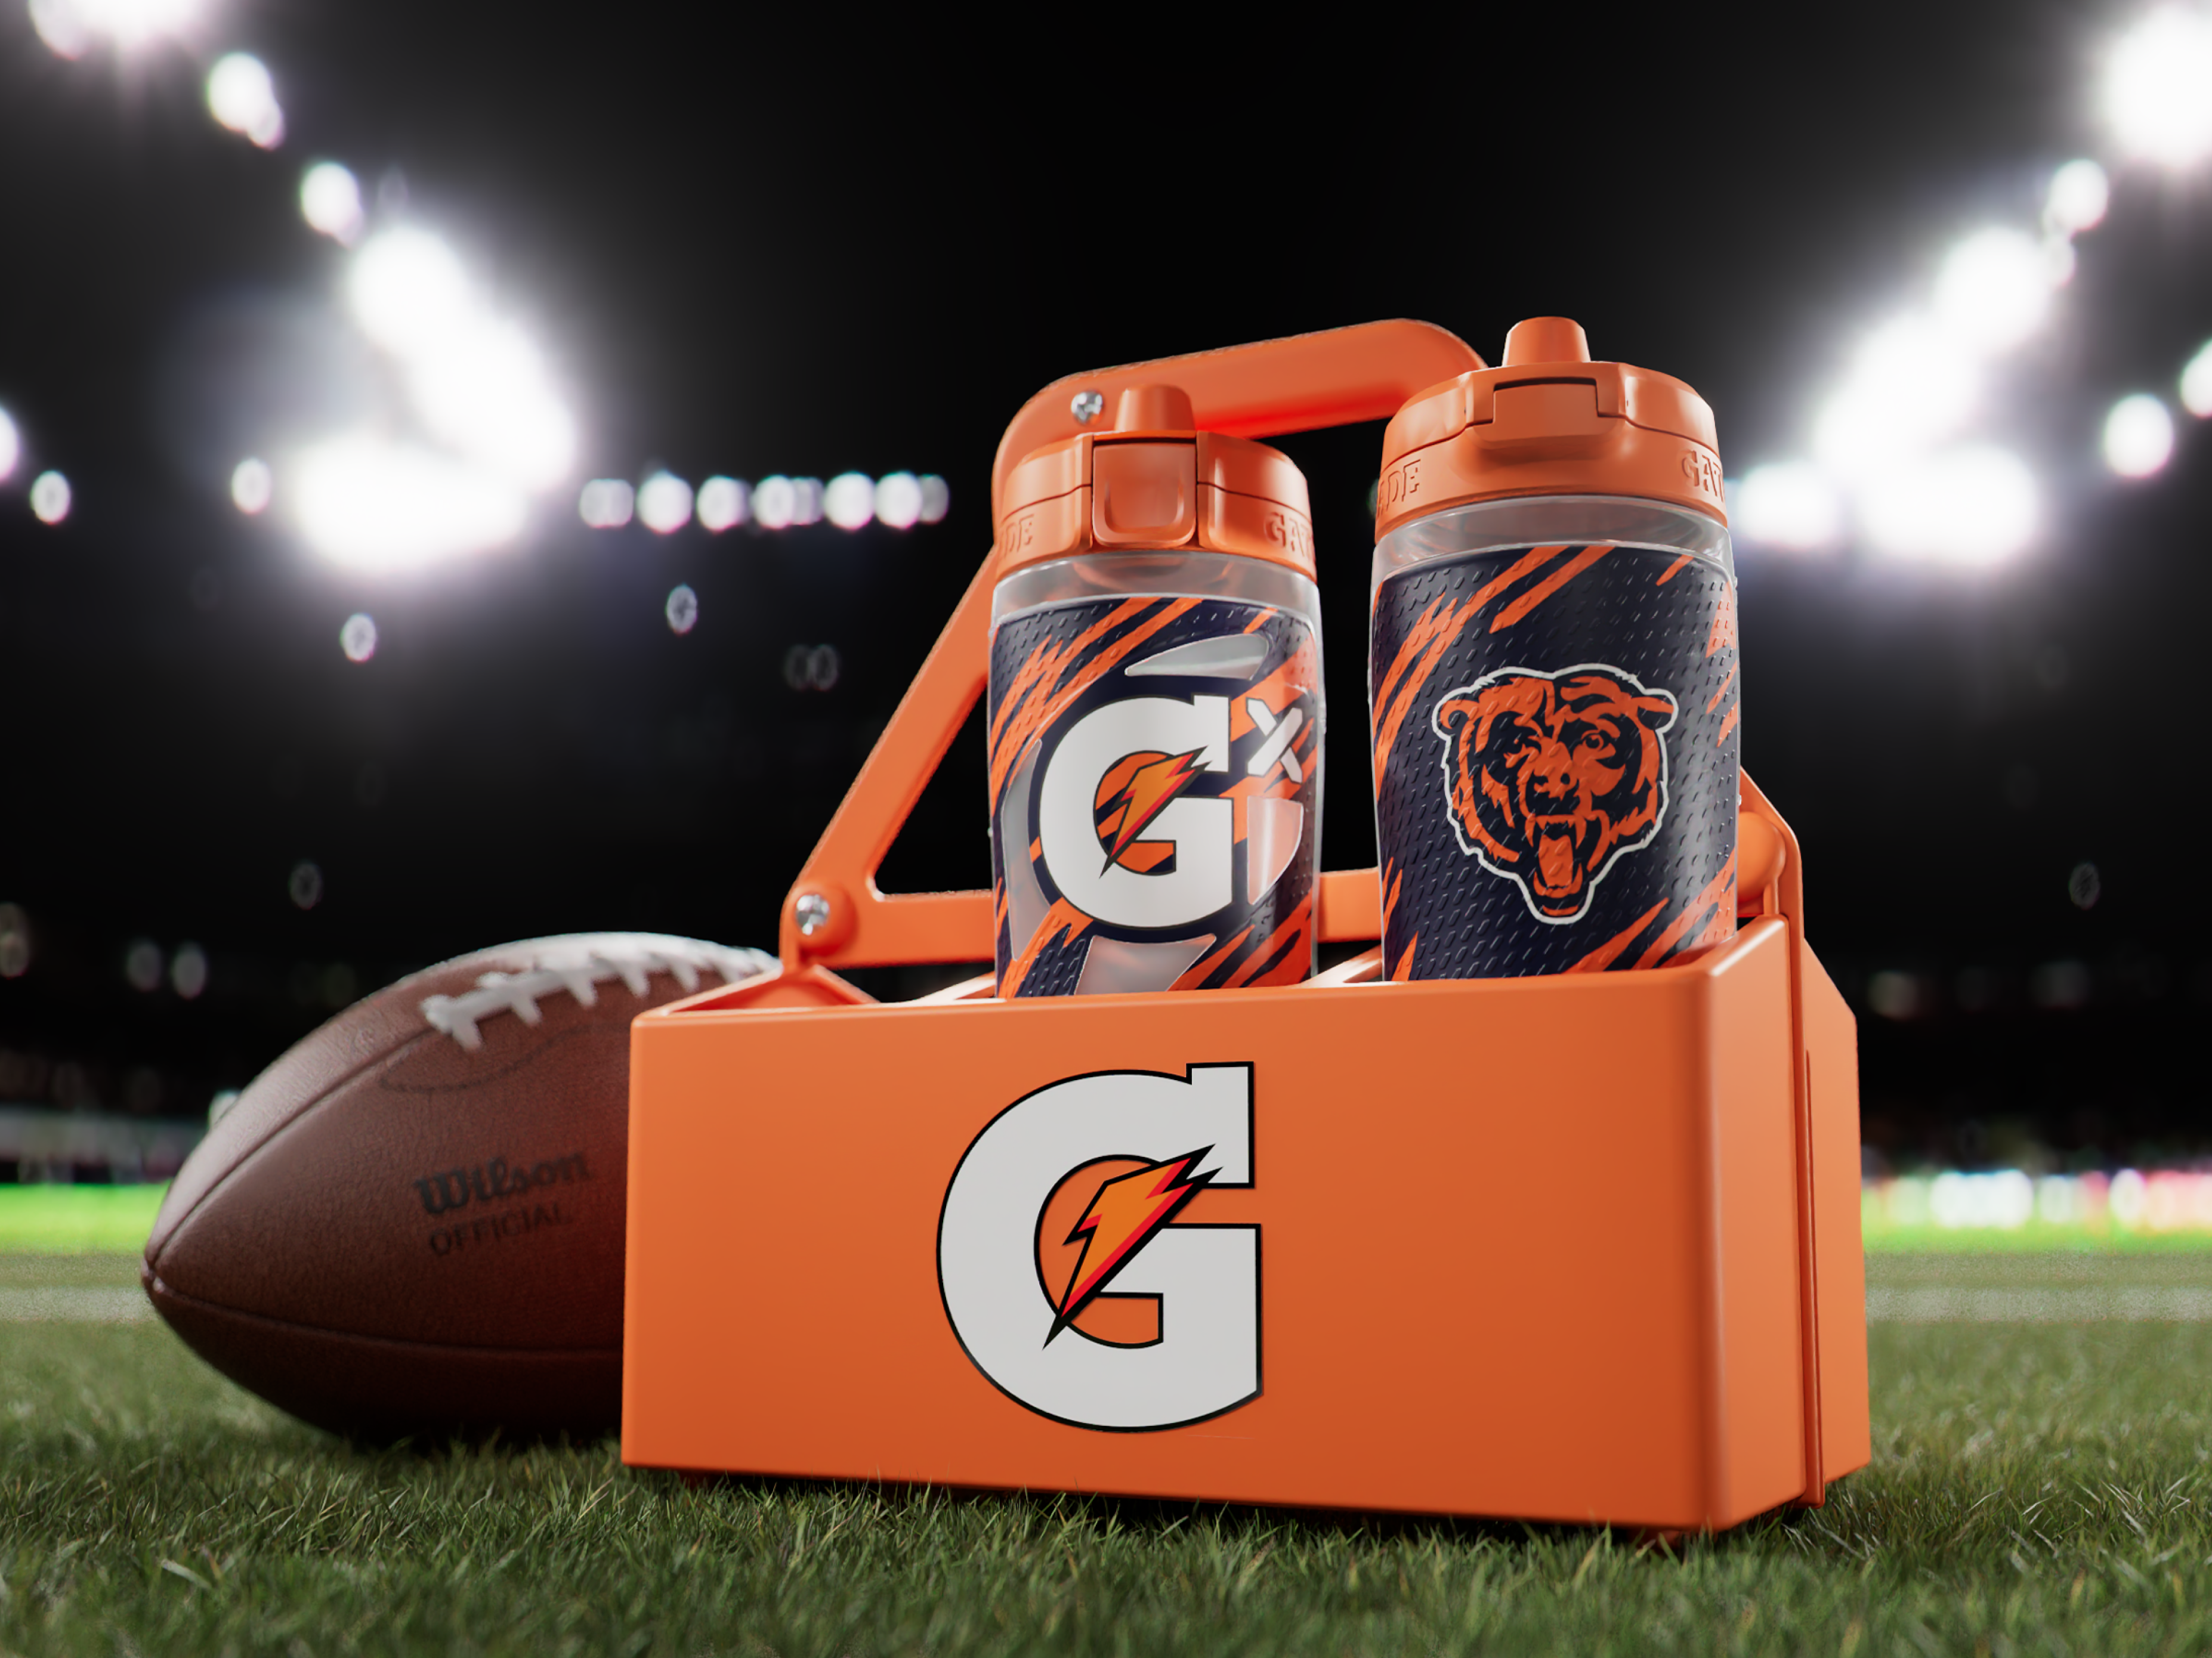 Orange Bottle Carrier on a Field with NFL Bottles and a Football